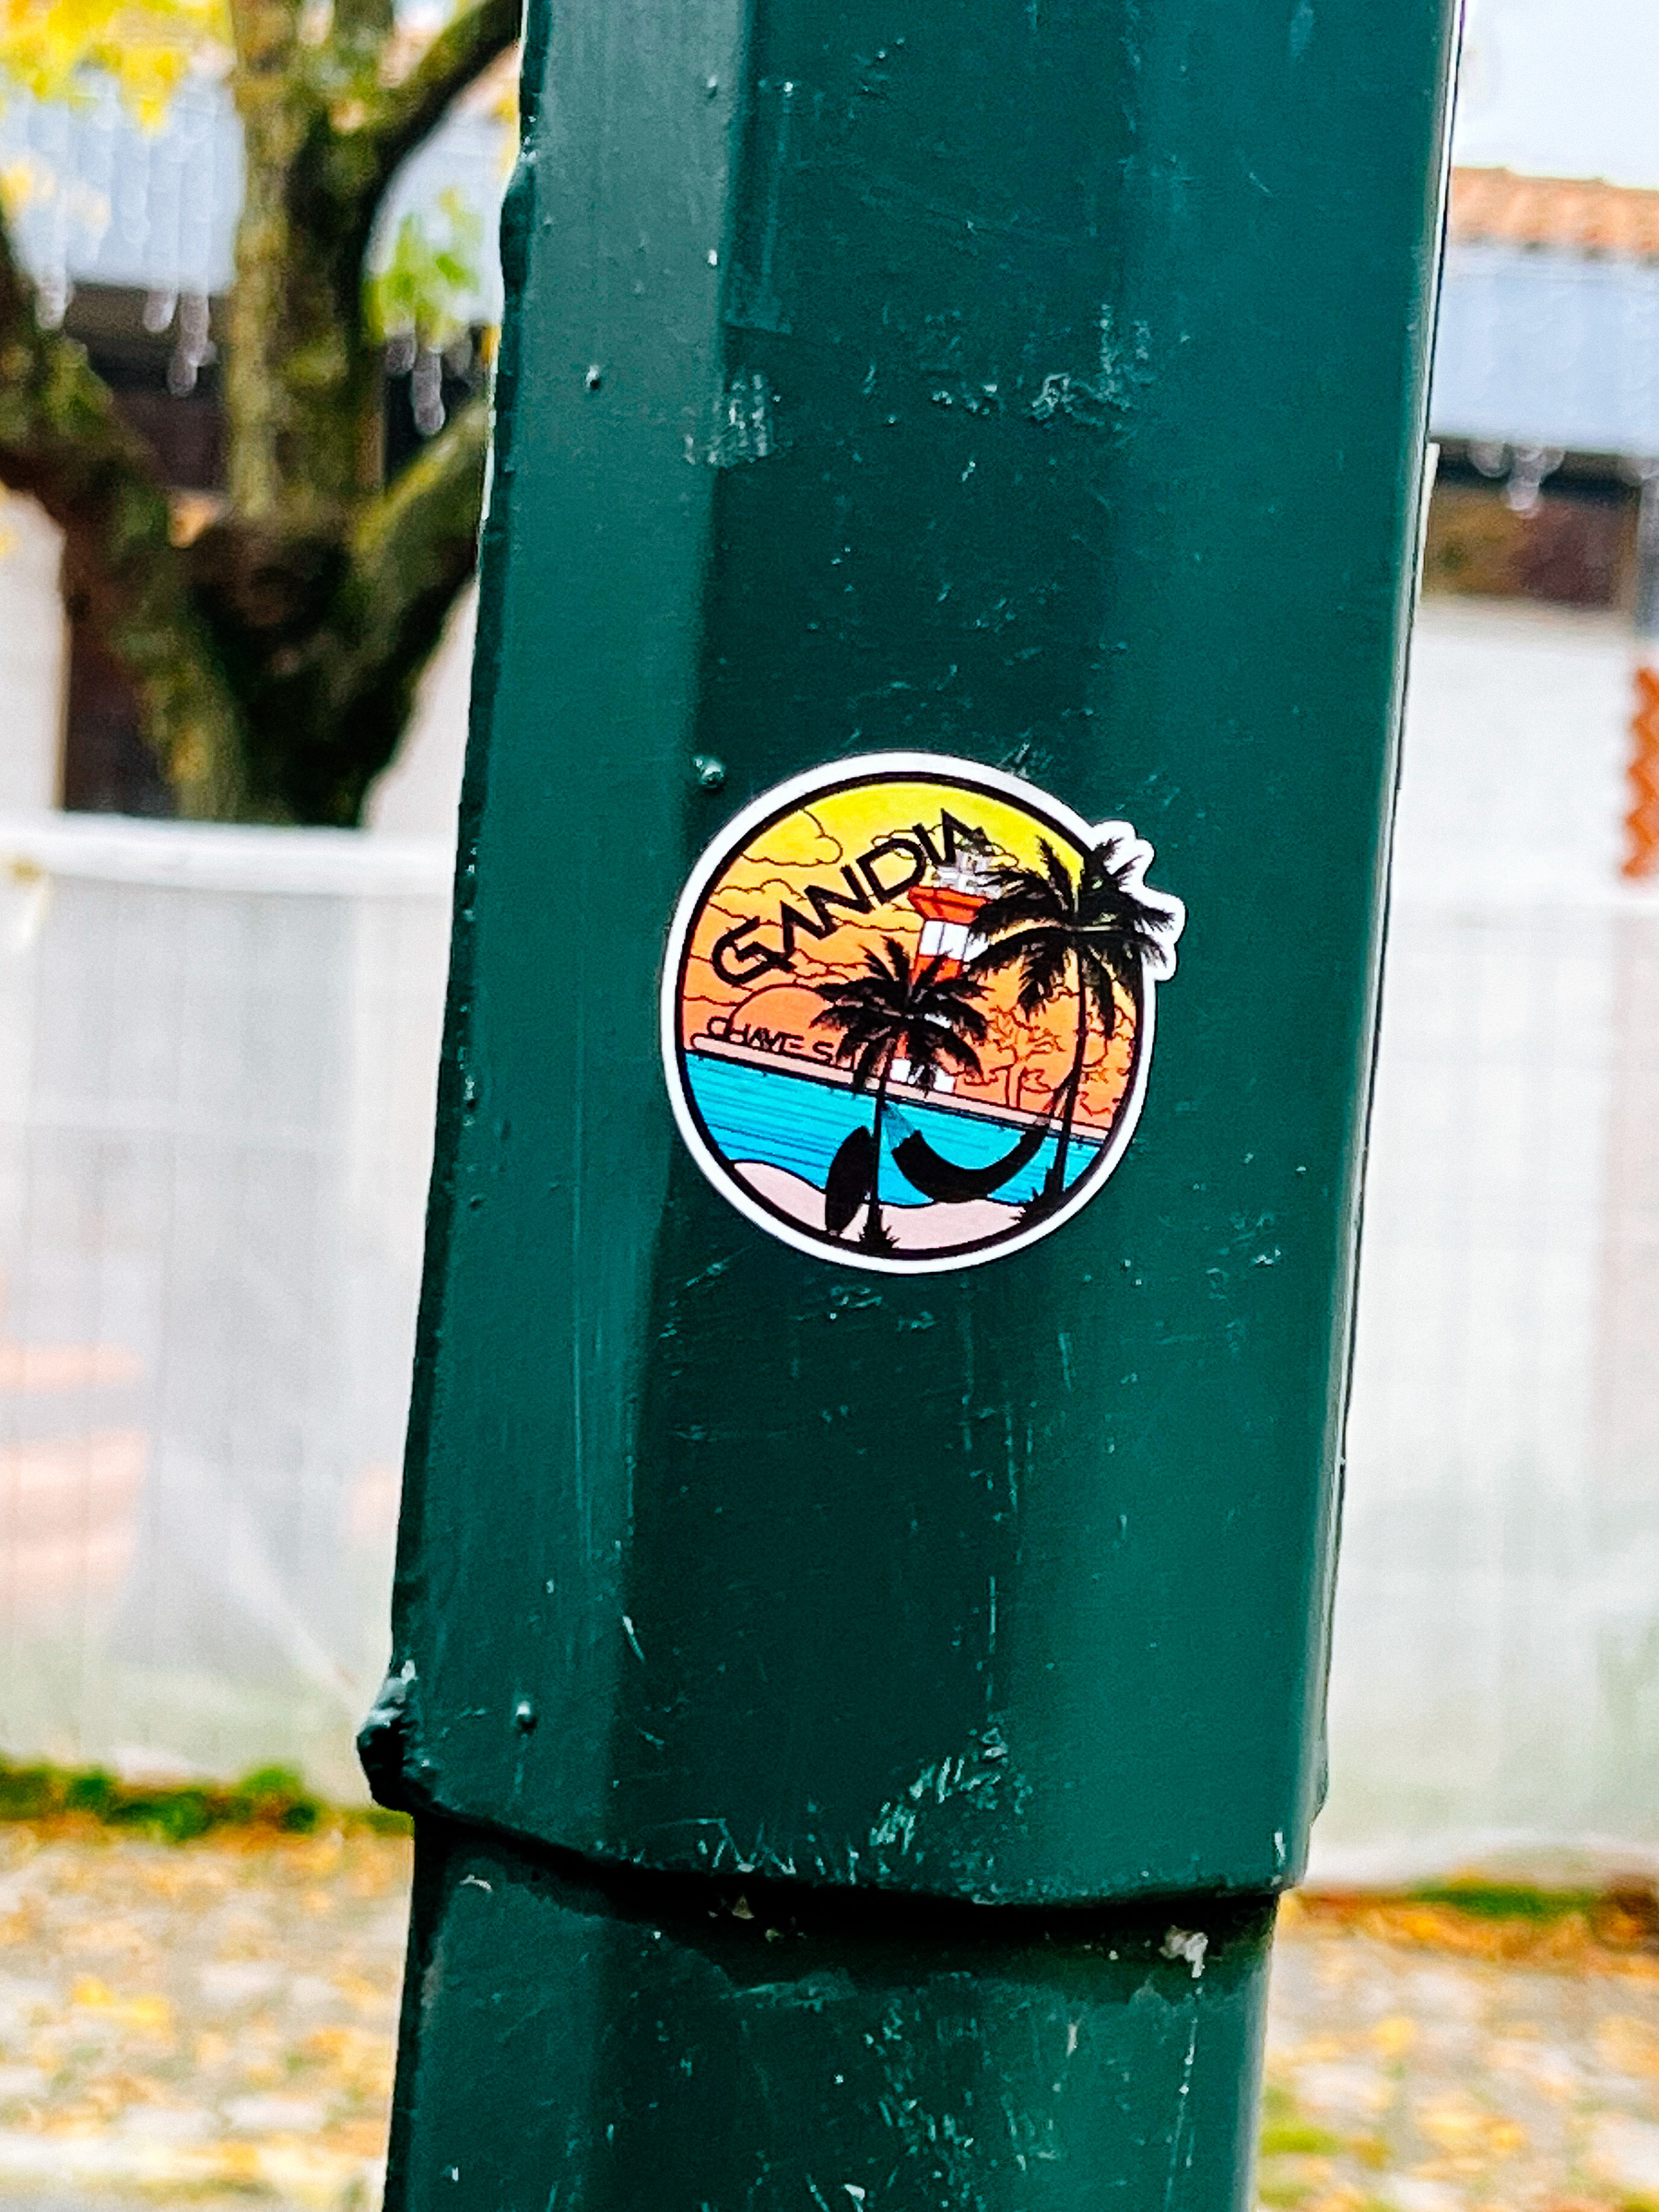 Sticker for “Gandia”, with palm trees and a lighthouse. 